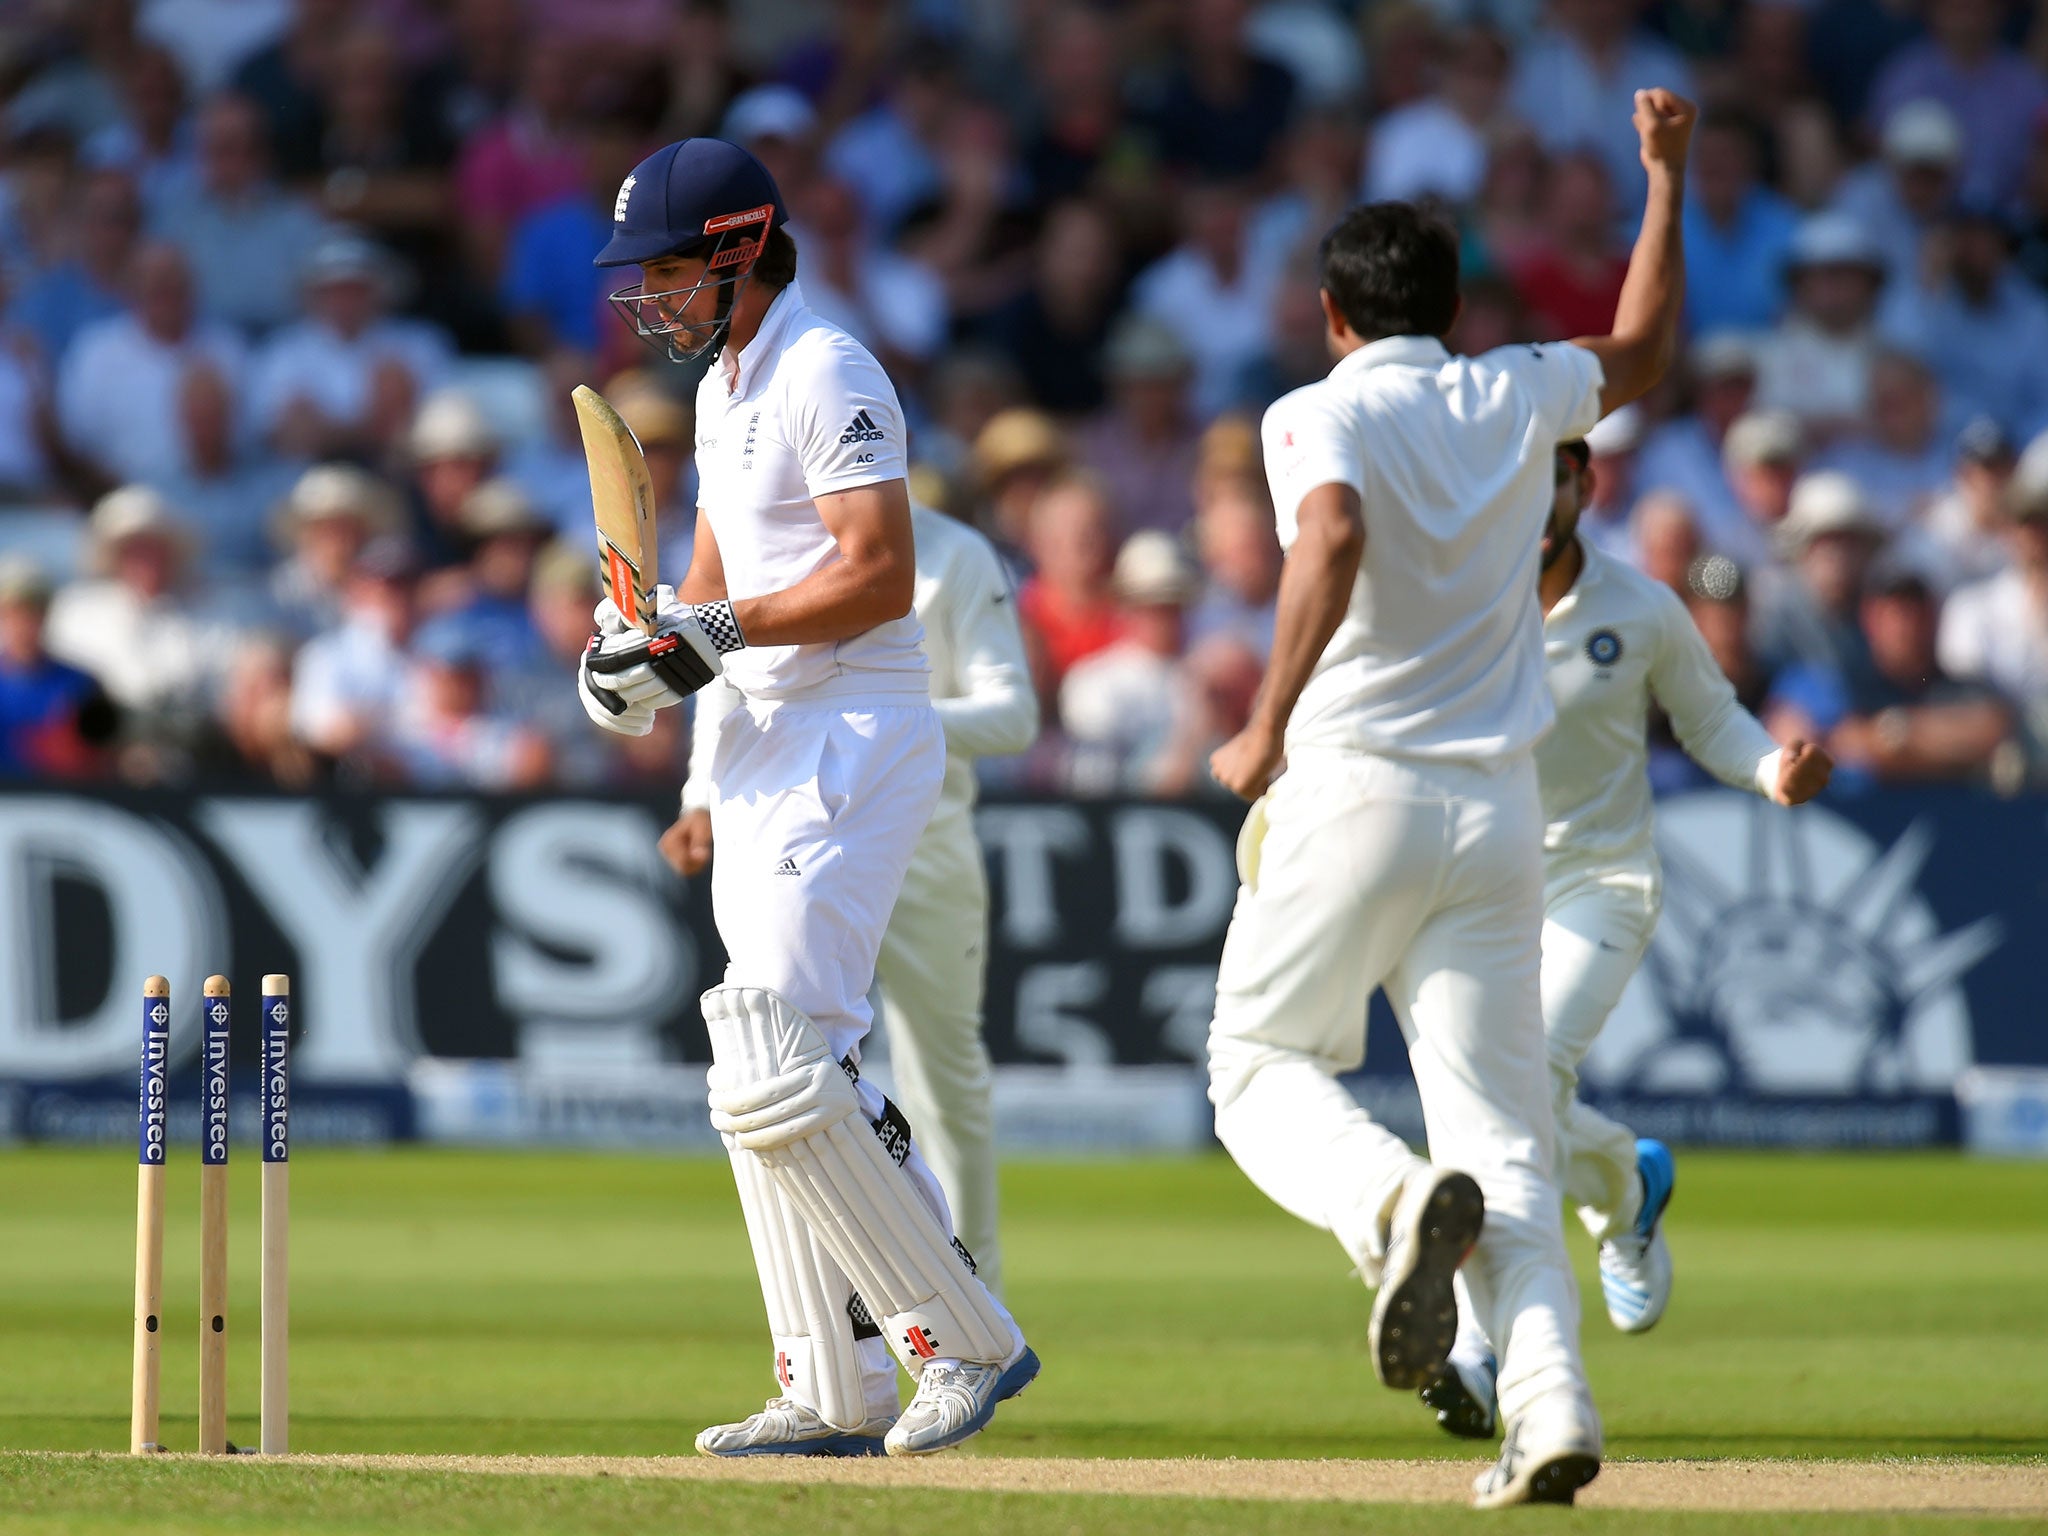 England skipper Alastair Cook had another miserable day with the bat, scoring just five runs